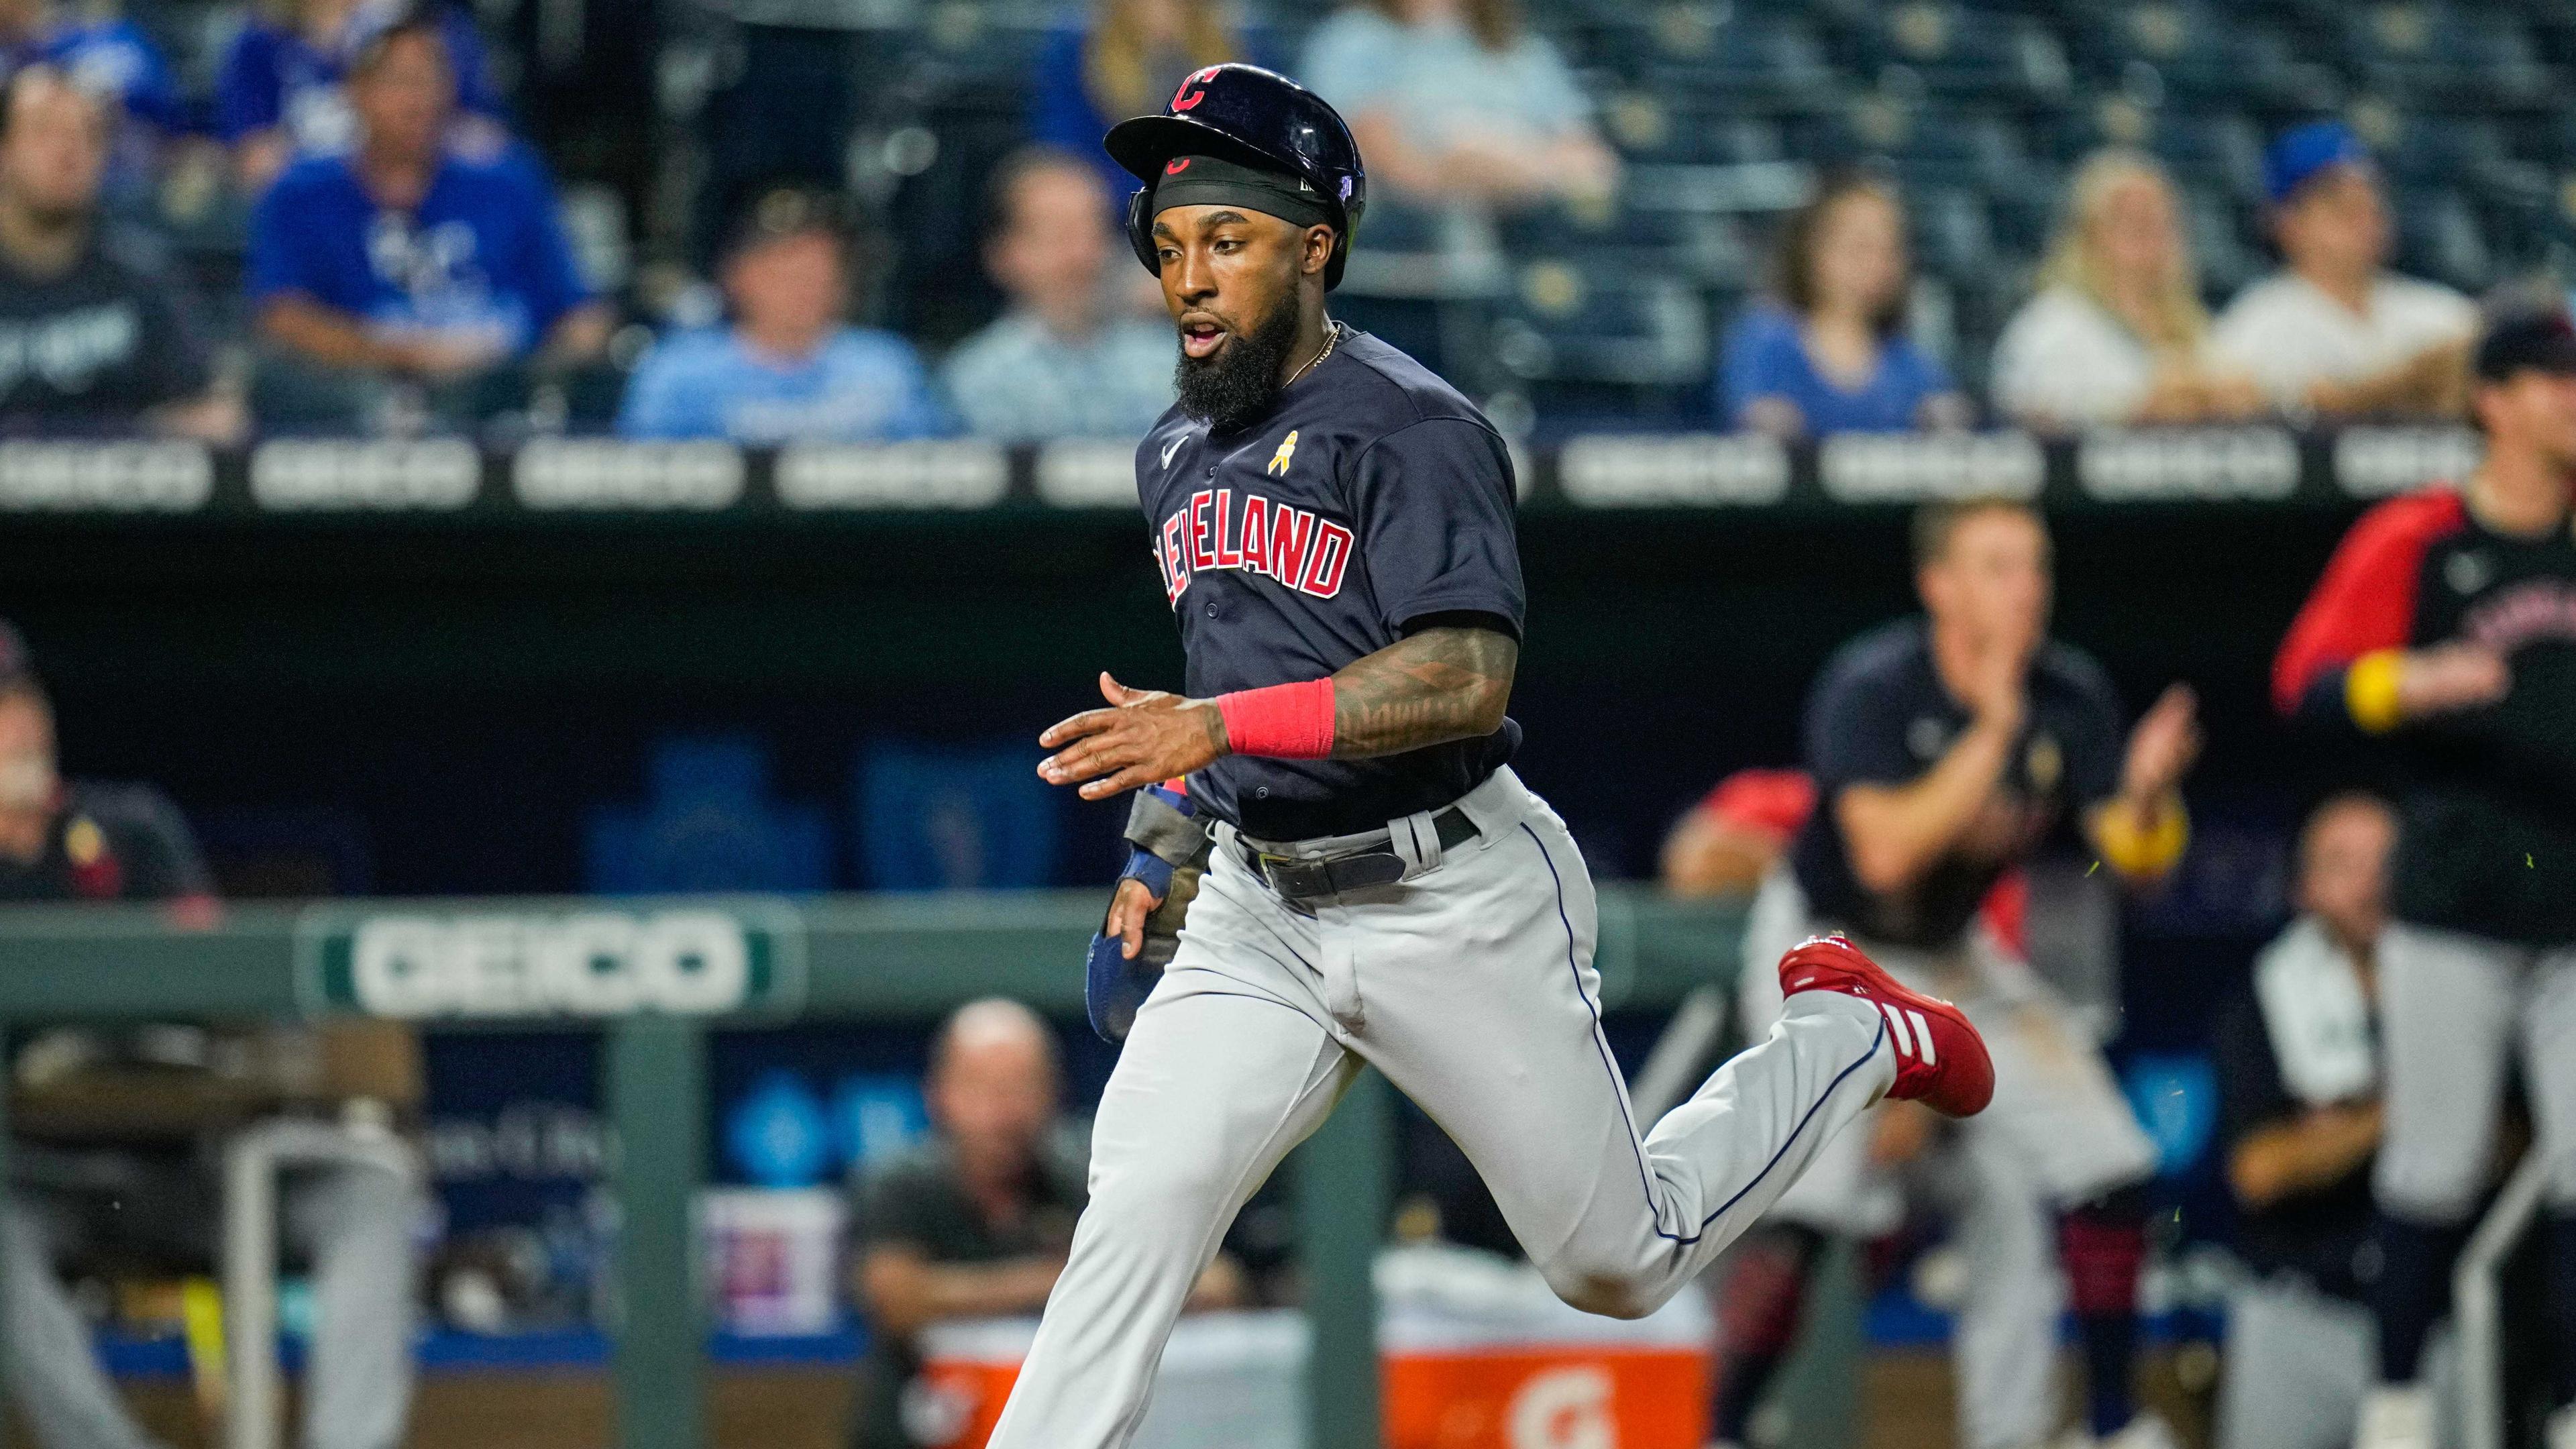 Cleveland Indians right fielder Daniel Johnson (23) scores a run against the Kansas City Royals during the eleventh inning at Kauffman Stadium. / Jay Biggerstaff/USA TODAY